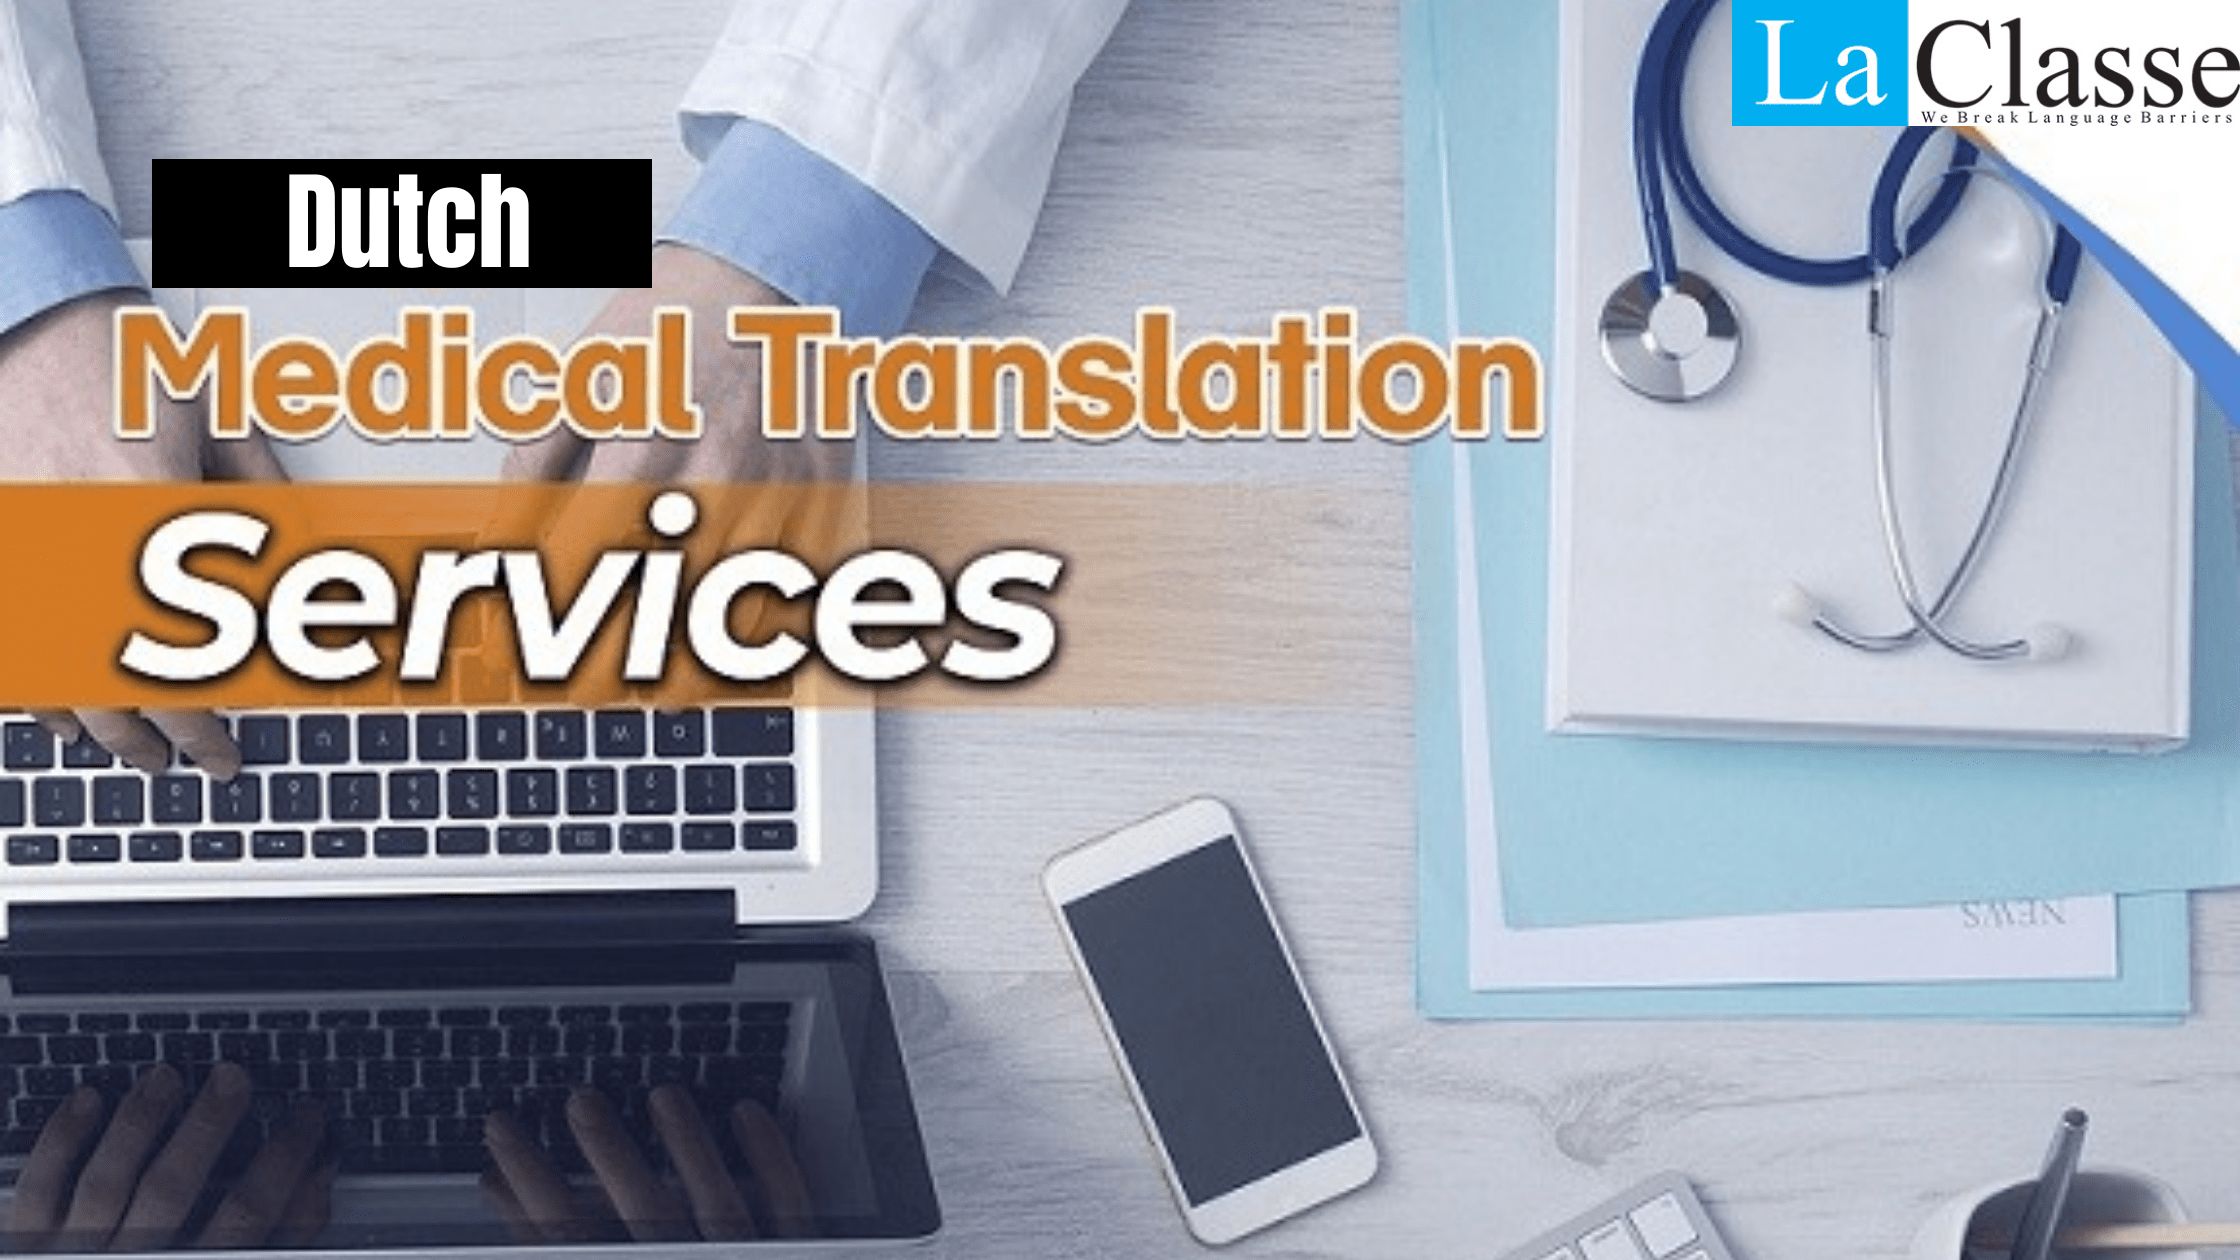 Dutch Medical Translation Services in India